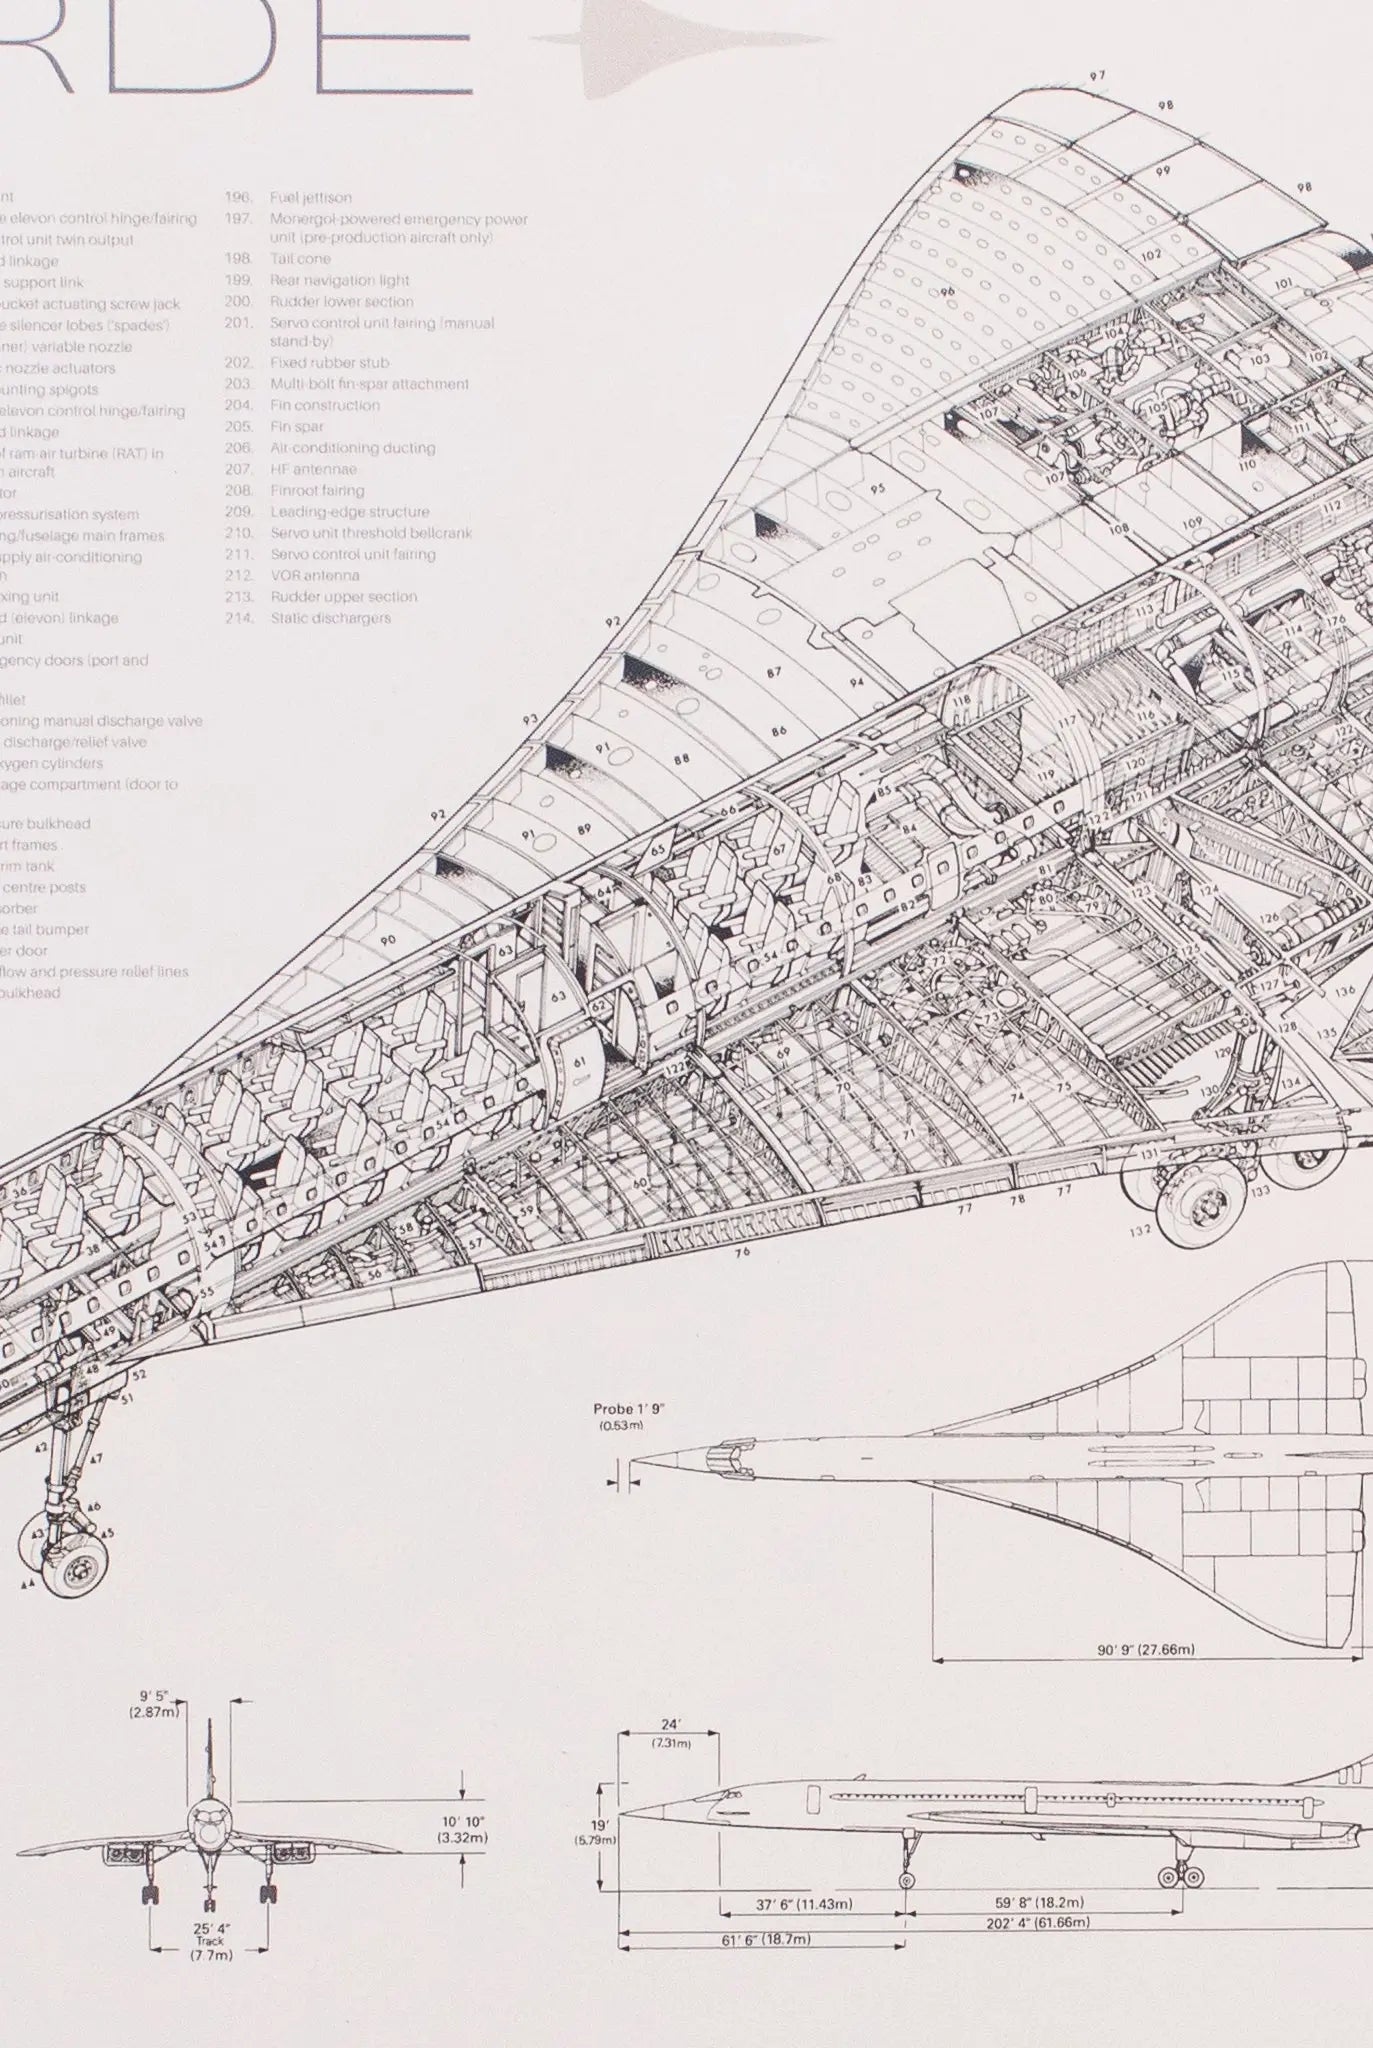 Concorde Supersonic Airliner Schematic - Stemcell Science Shop